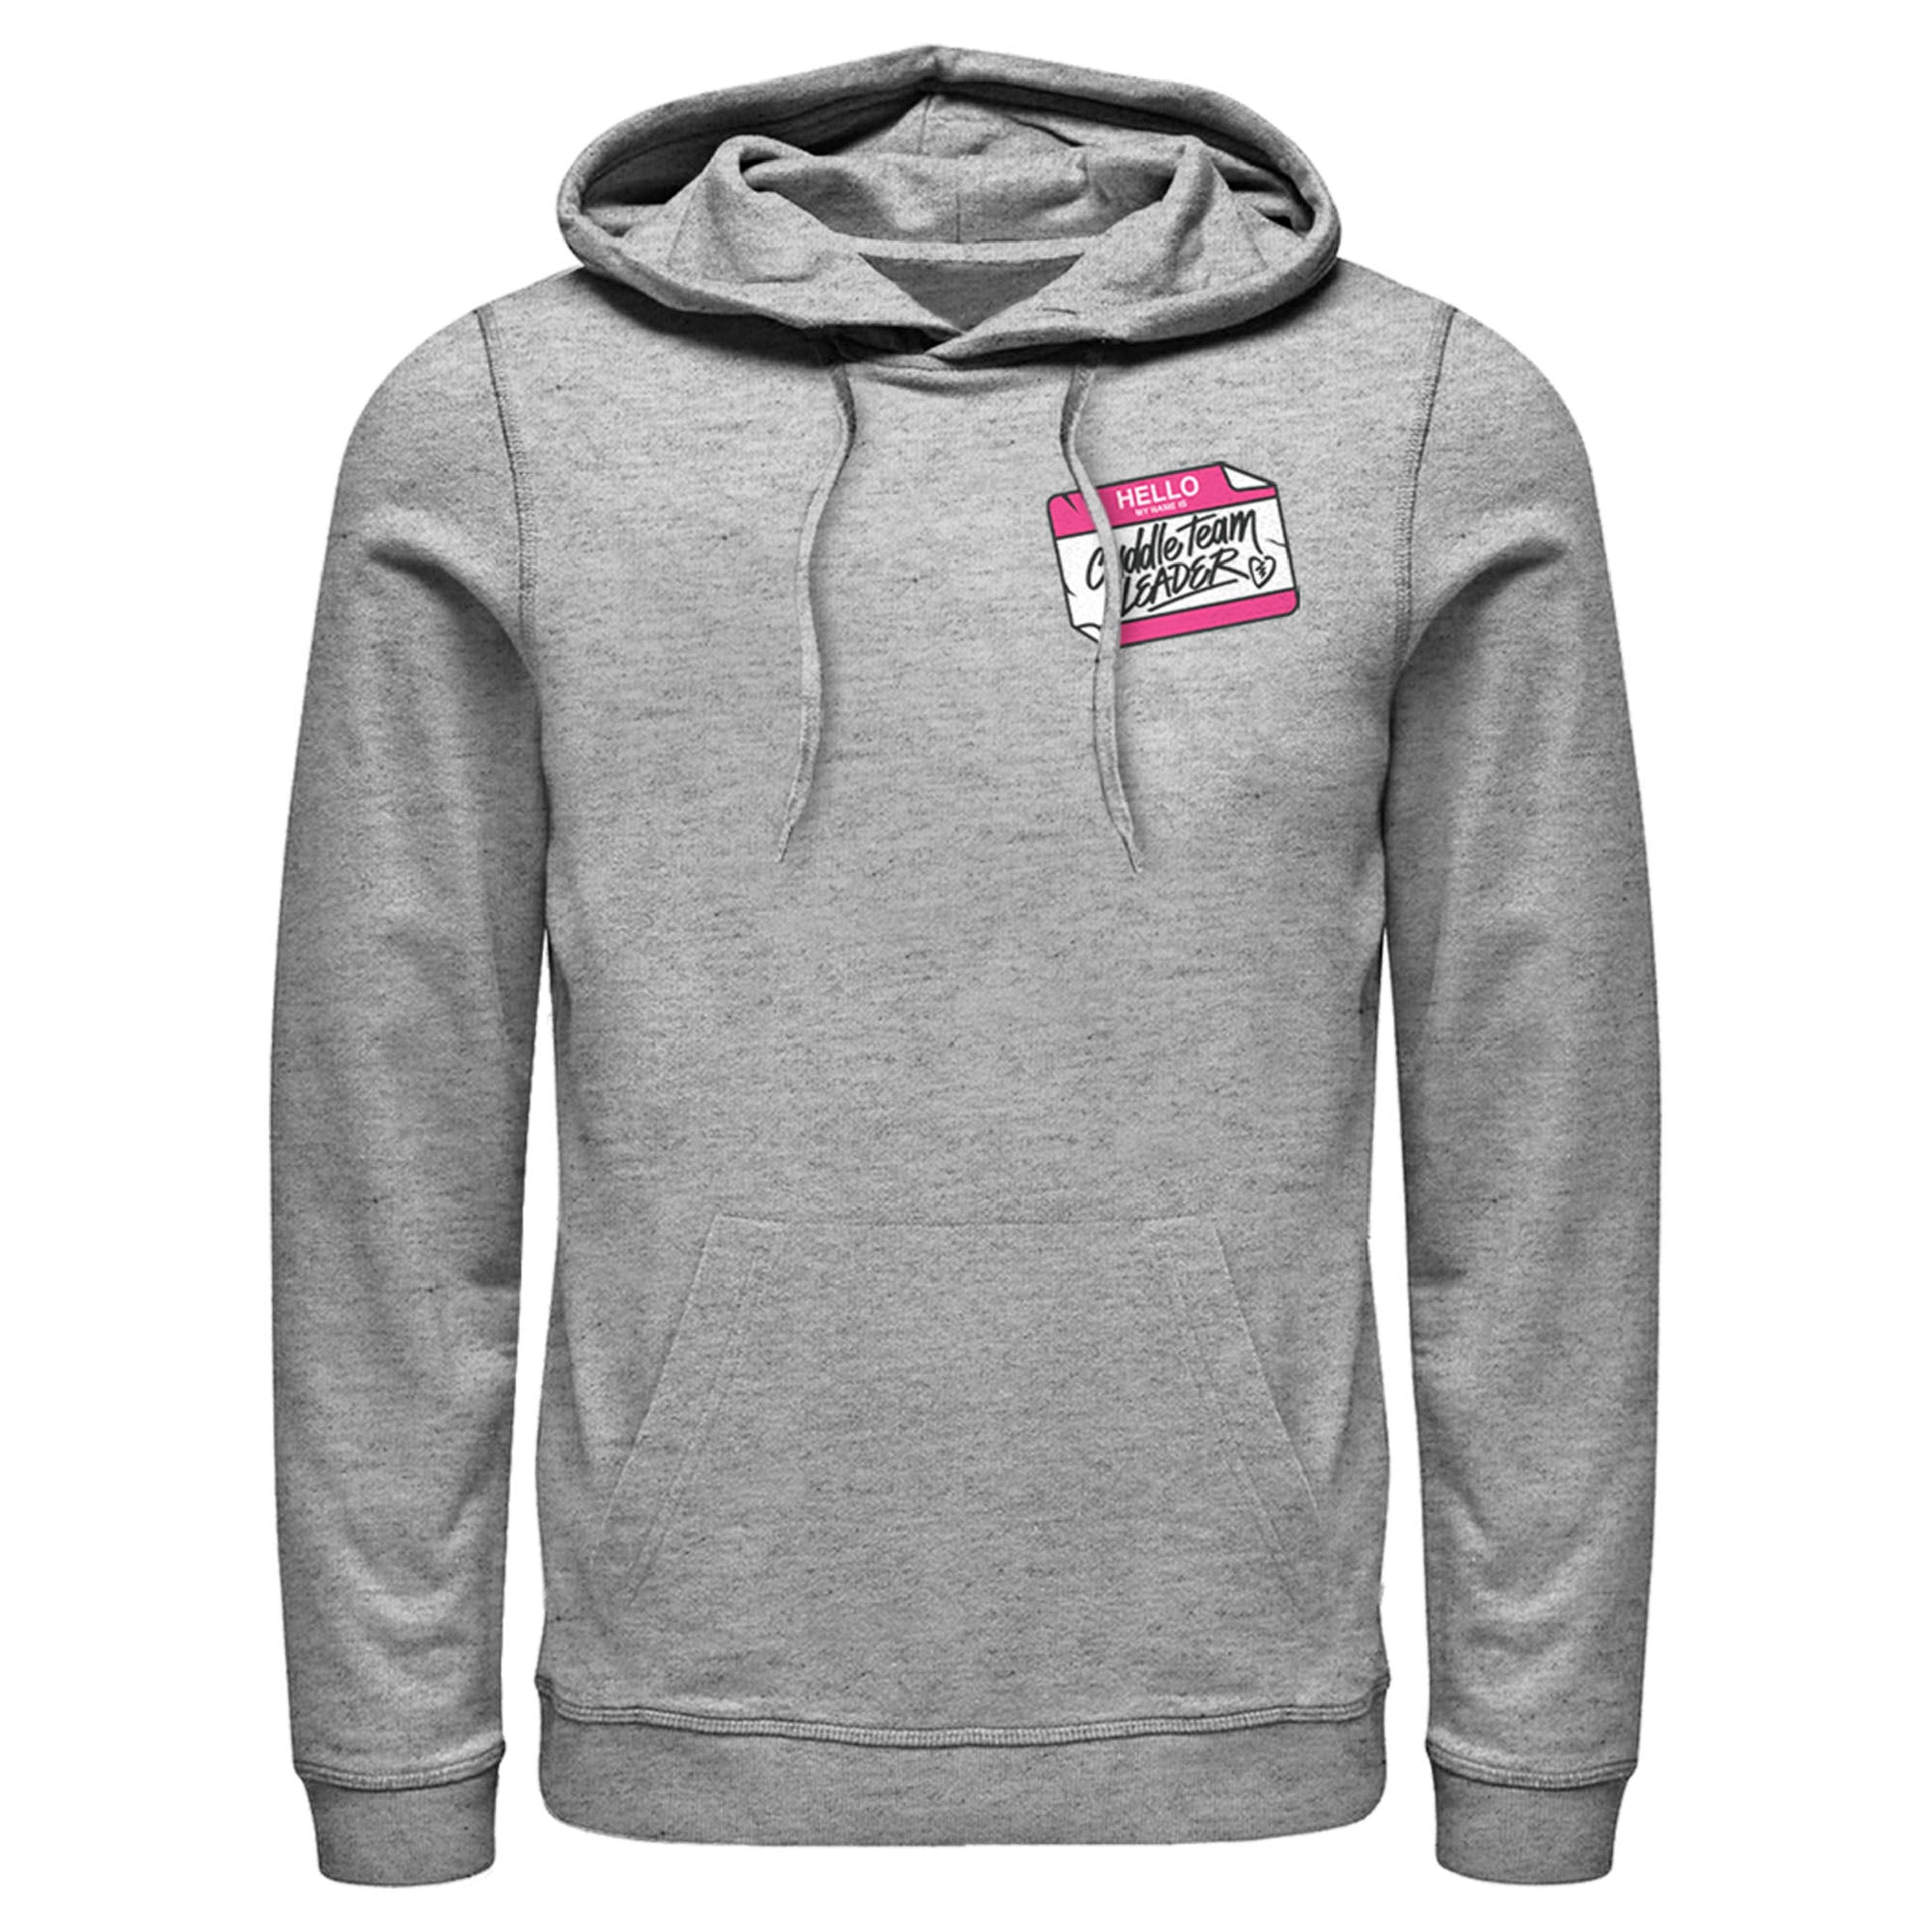 Alternate View 2 of Men's Fortnite Cuddle Name Tag Pull Over Hoodie